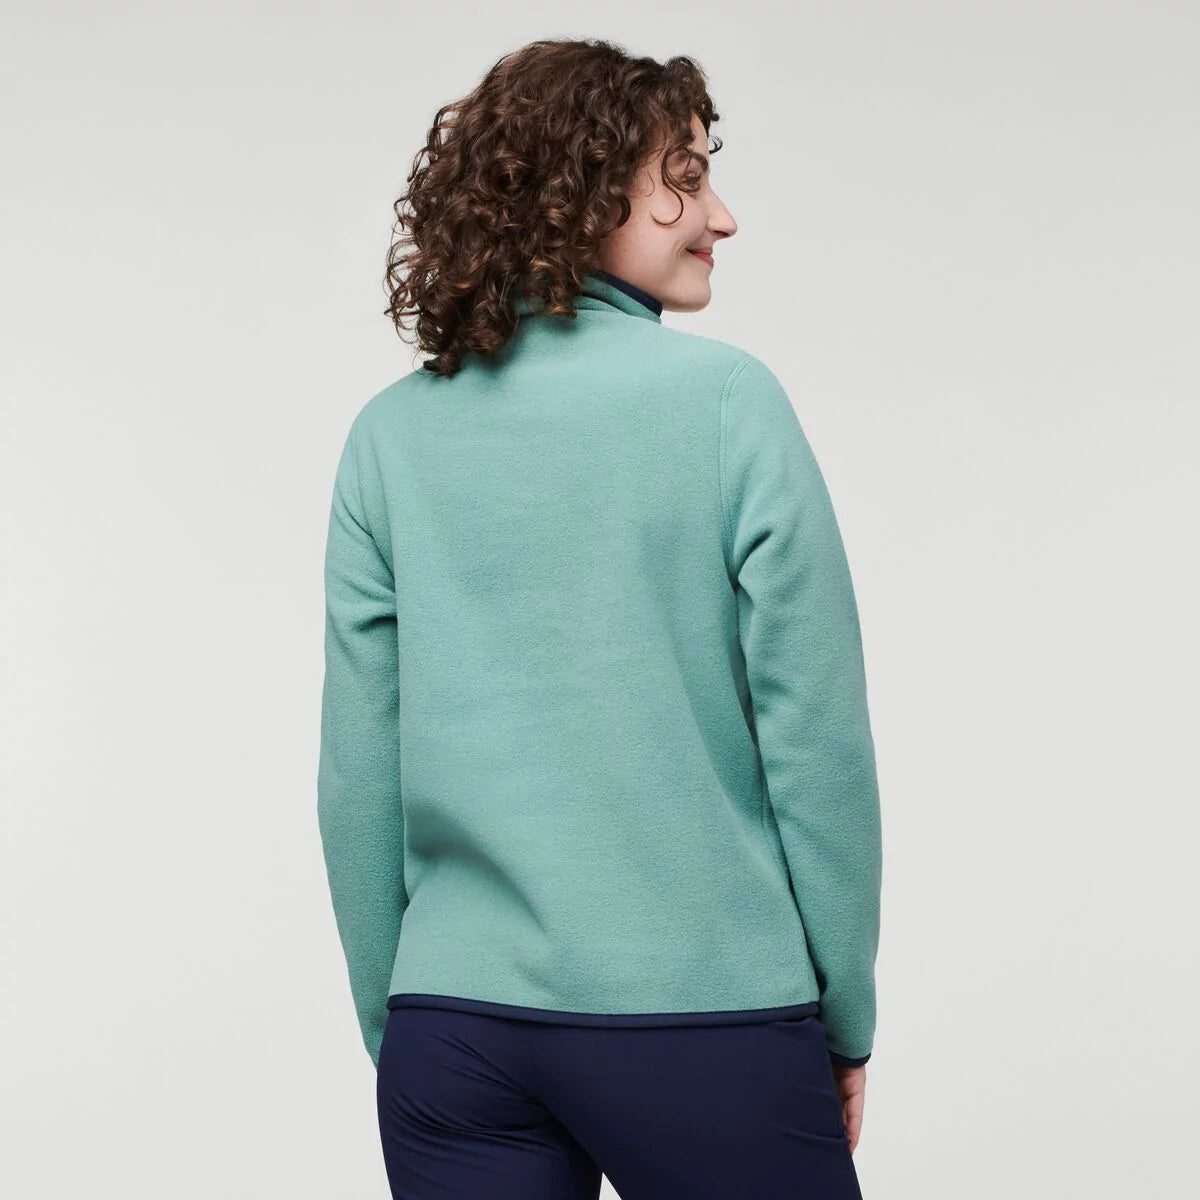 Cotopaxi W's Teca Fleece Pullover - Recycled polyester Graze Lightly Shirt